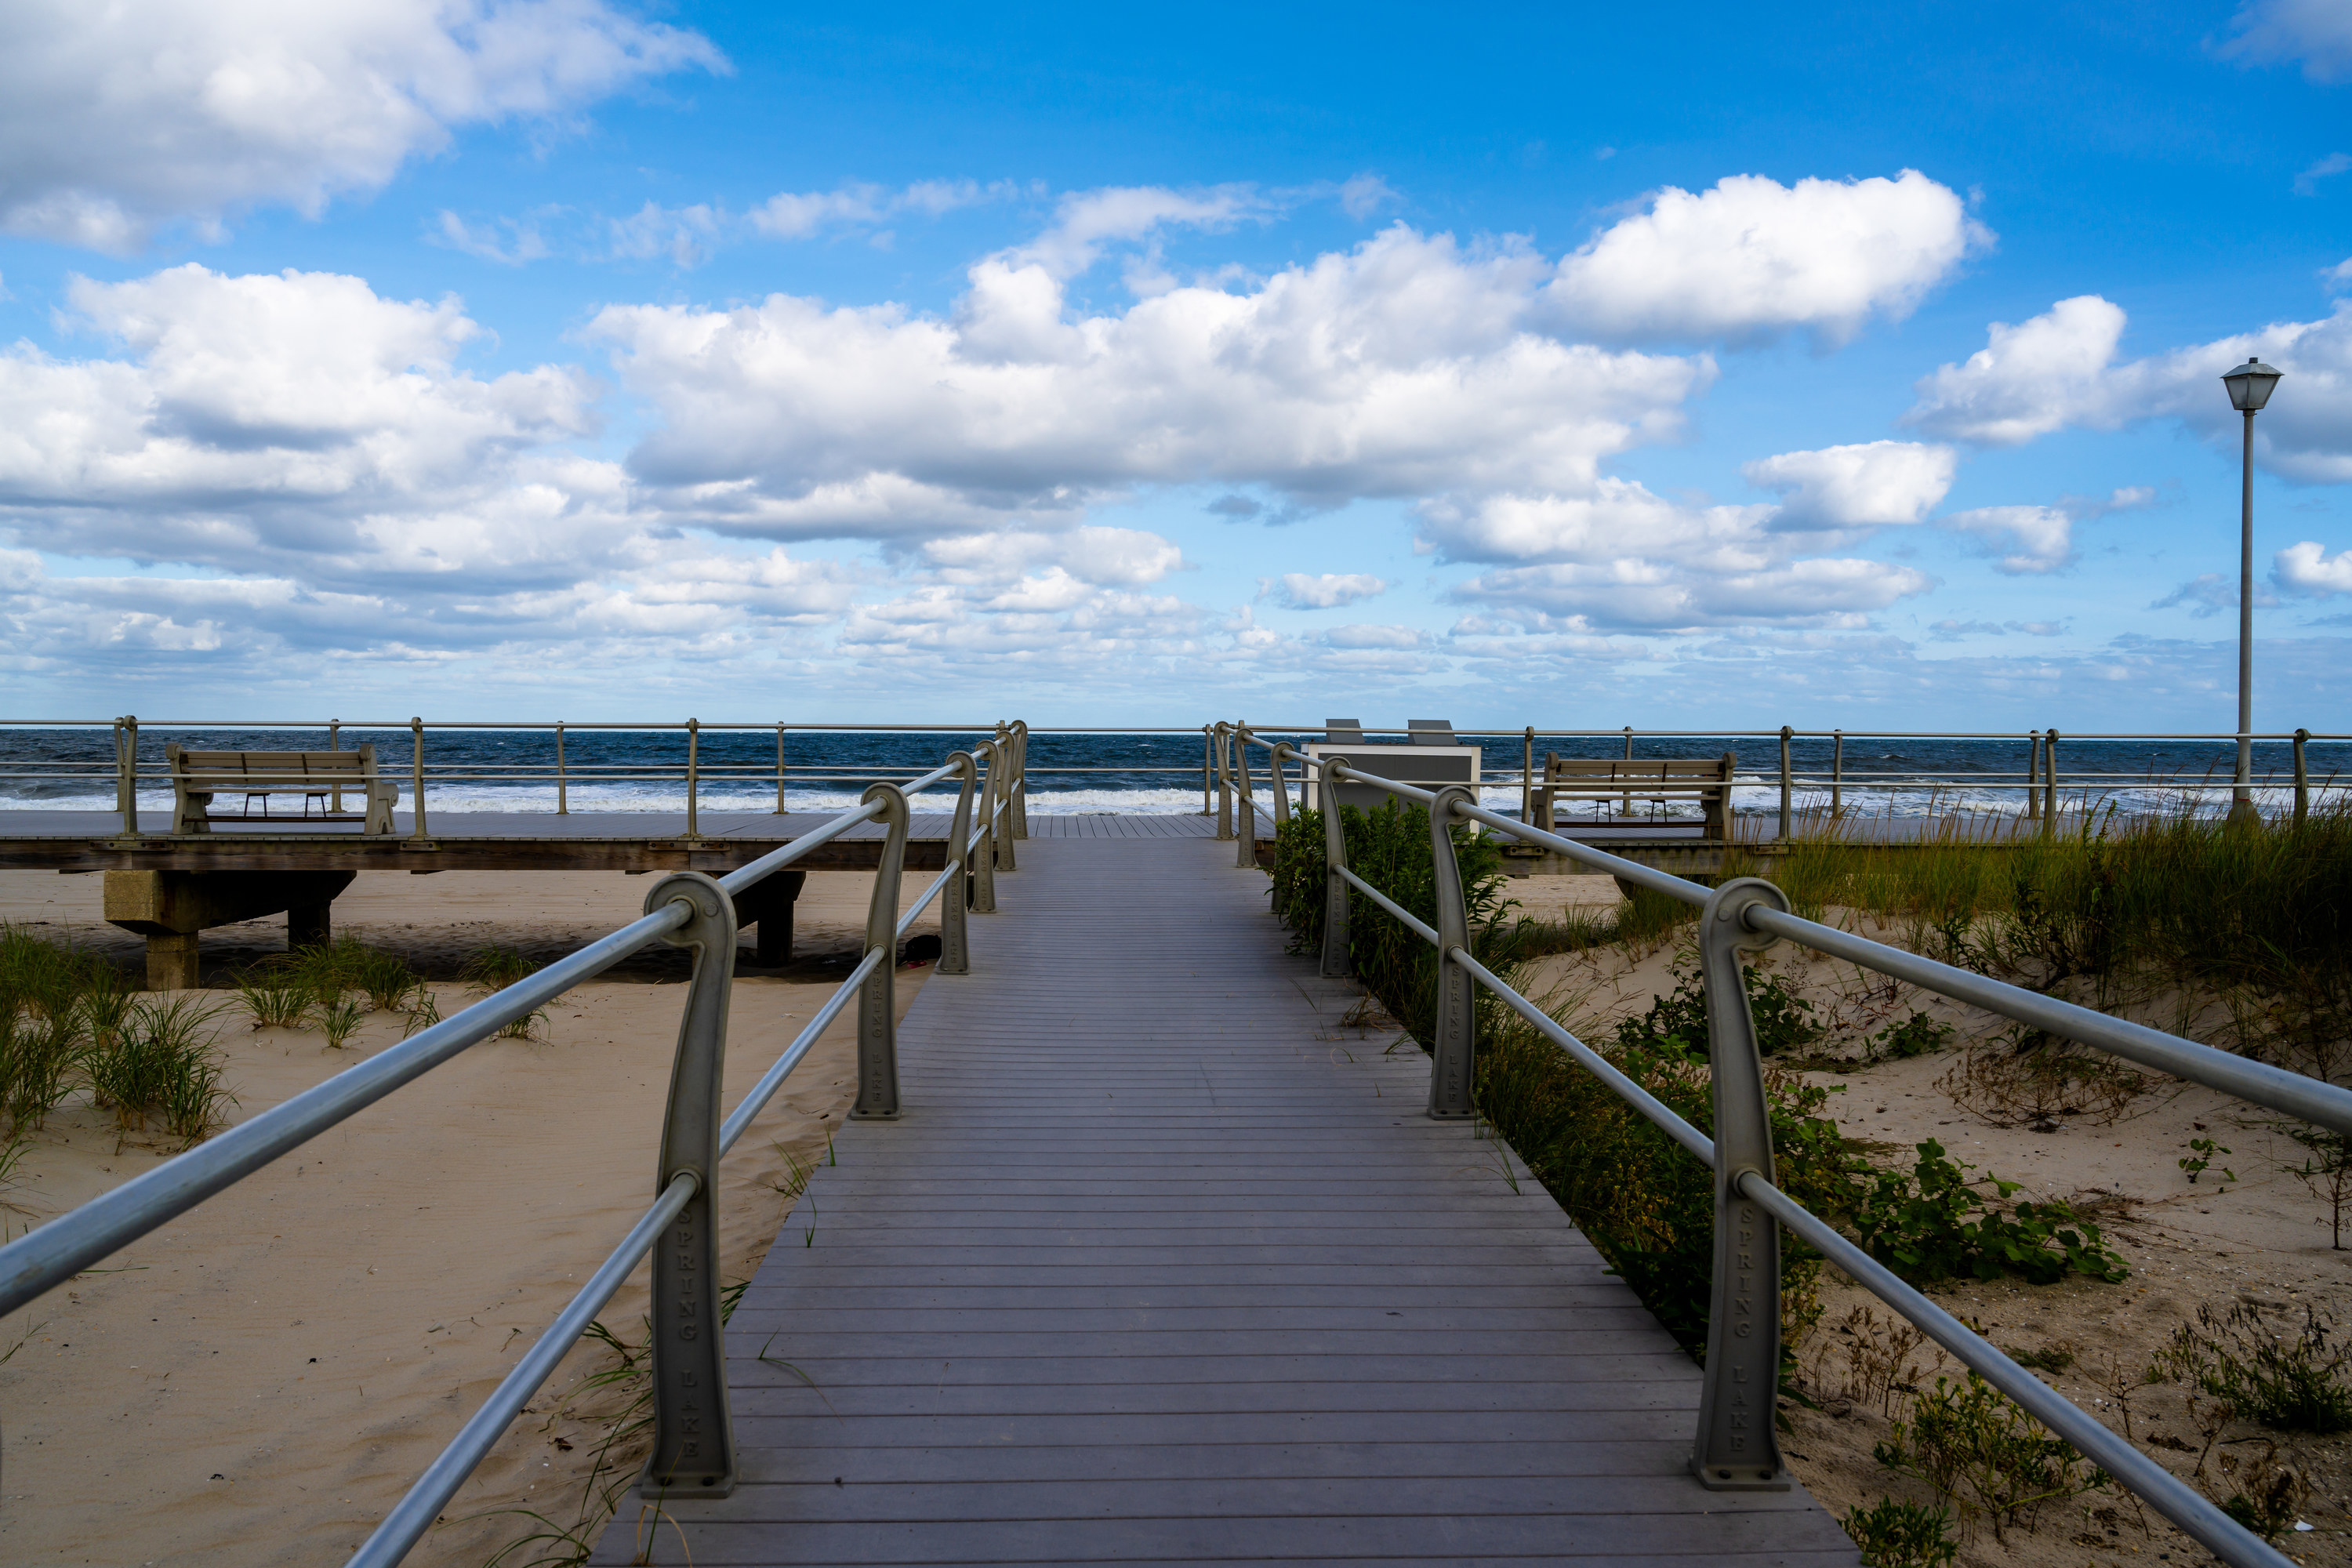 A scenic view of the boardwalk and beach in Spring Lake, New Jersey